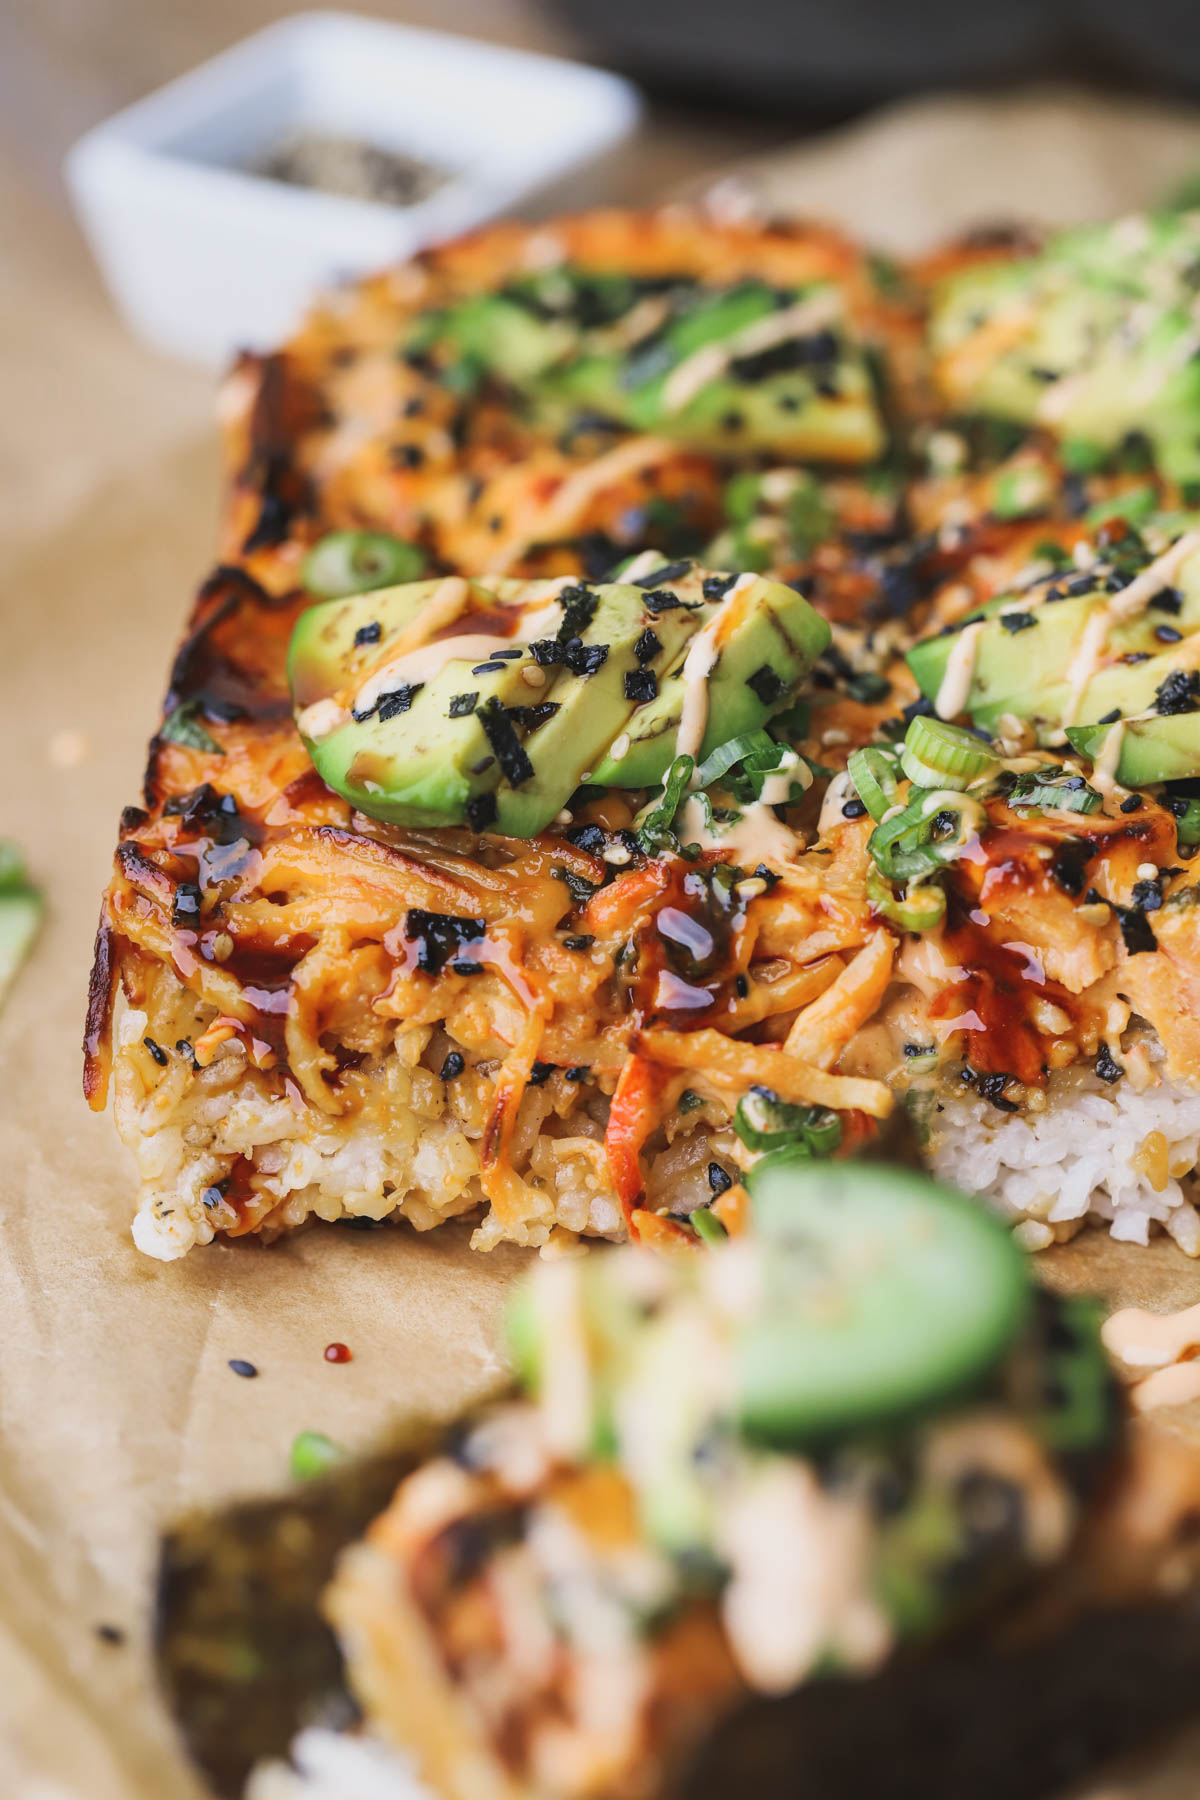 Spicy salmon sushi bake with unagi sauce, spicy mayo, and avocados.  